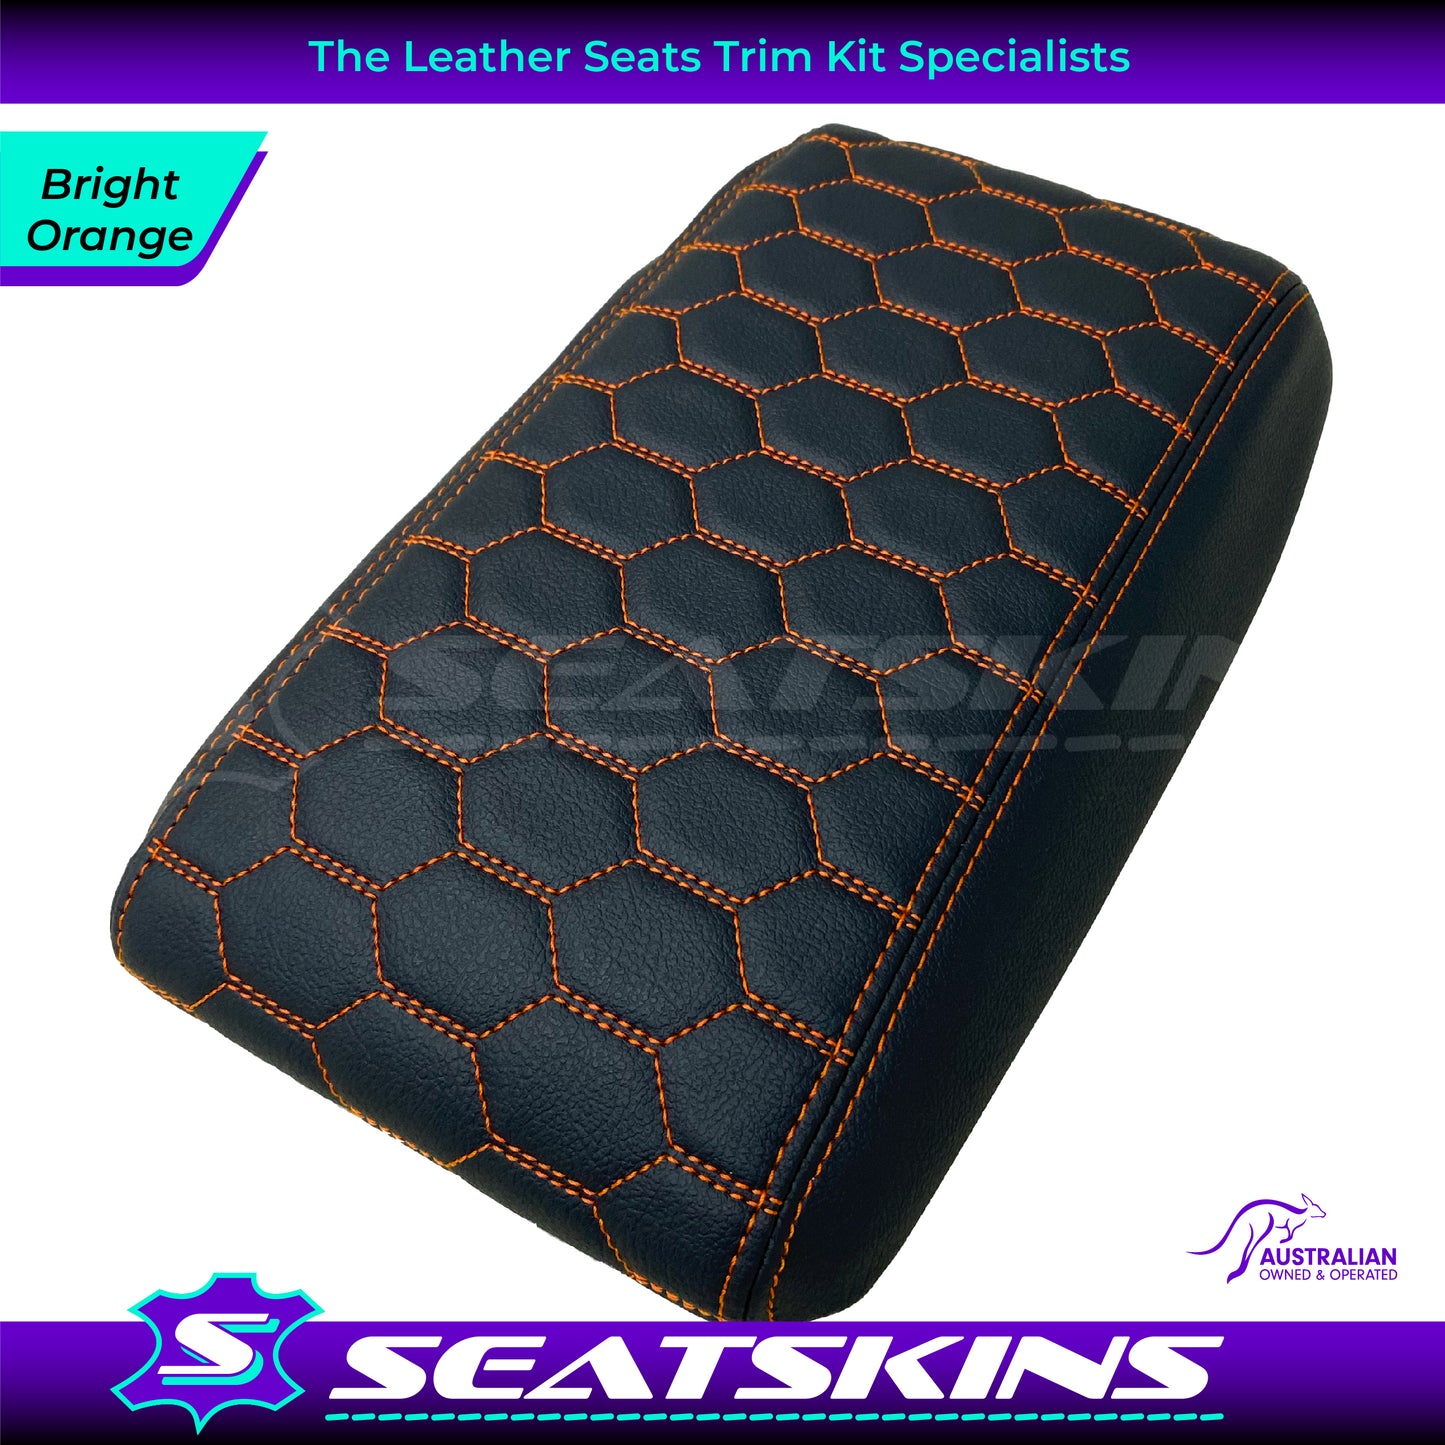 CUSTOM CONSOLE COVER TO FIT HOLDEN VY VZ HEXAGON STITCH CHOOSE COLOUR